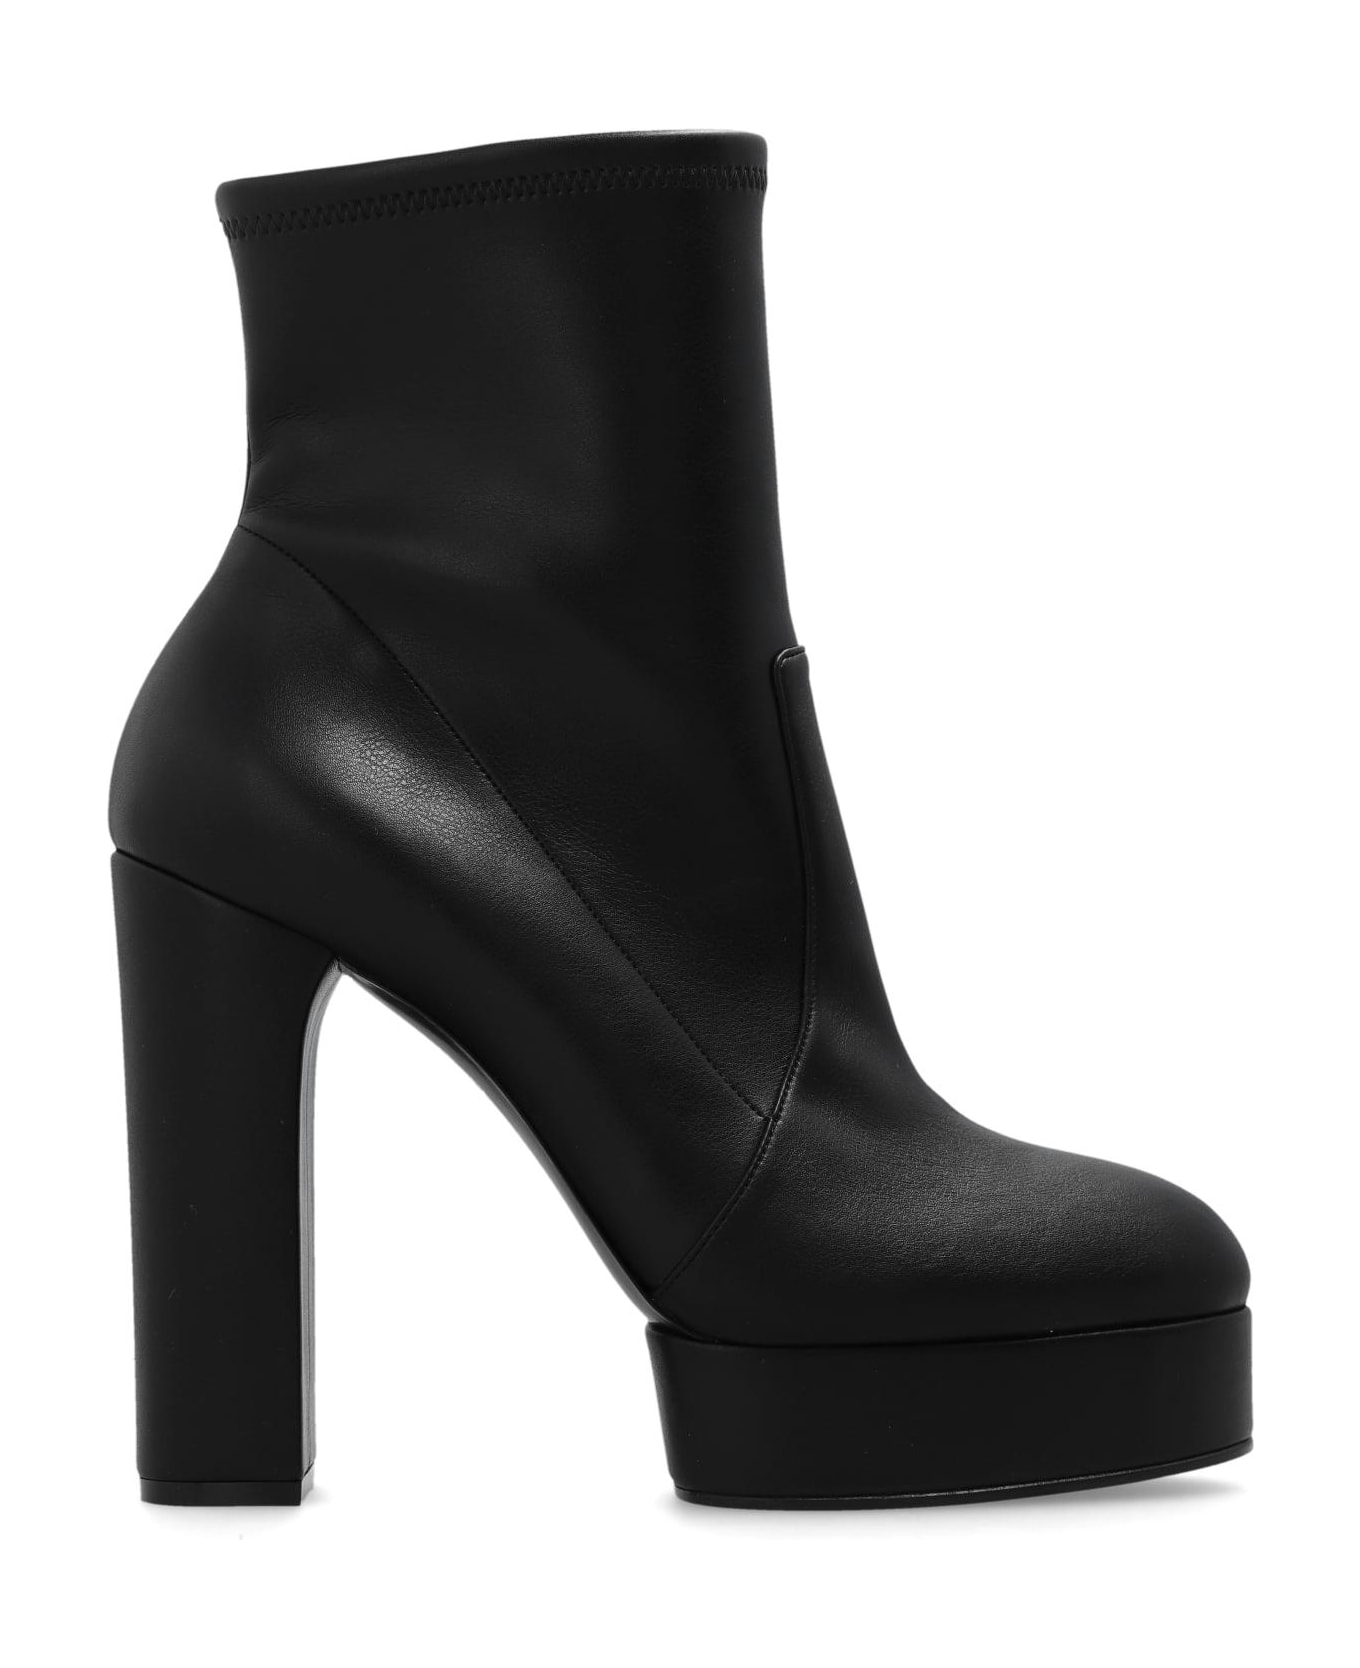 Casadei Heeled Ankle Boots With Leather - Black ブーツ